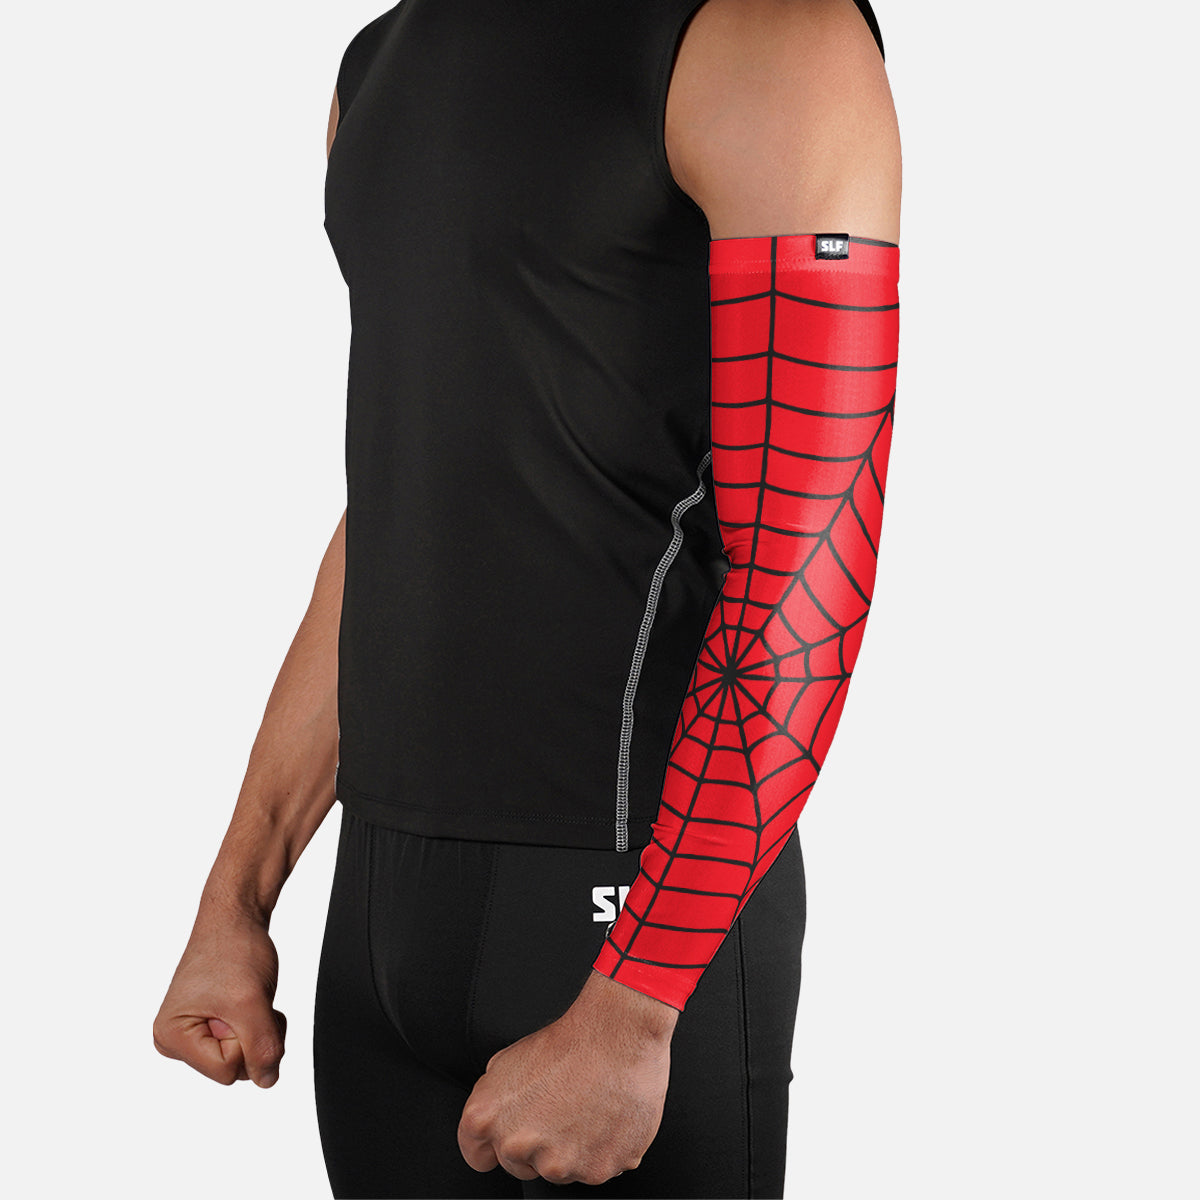 Red Web Pattern Arm Sleeve